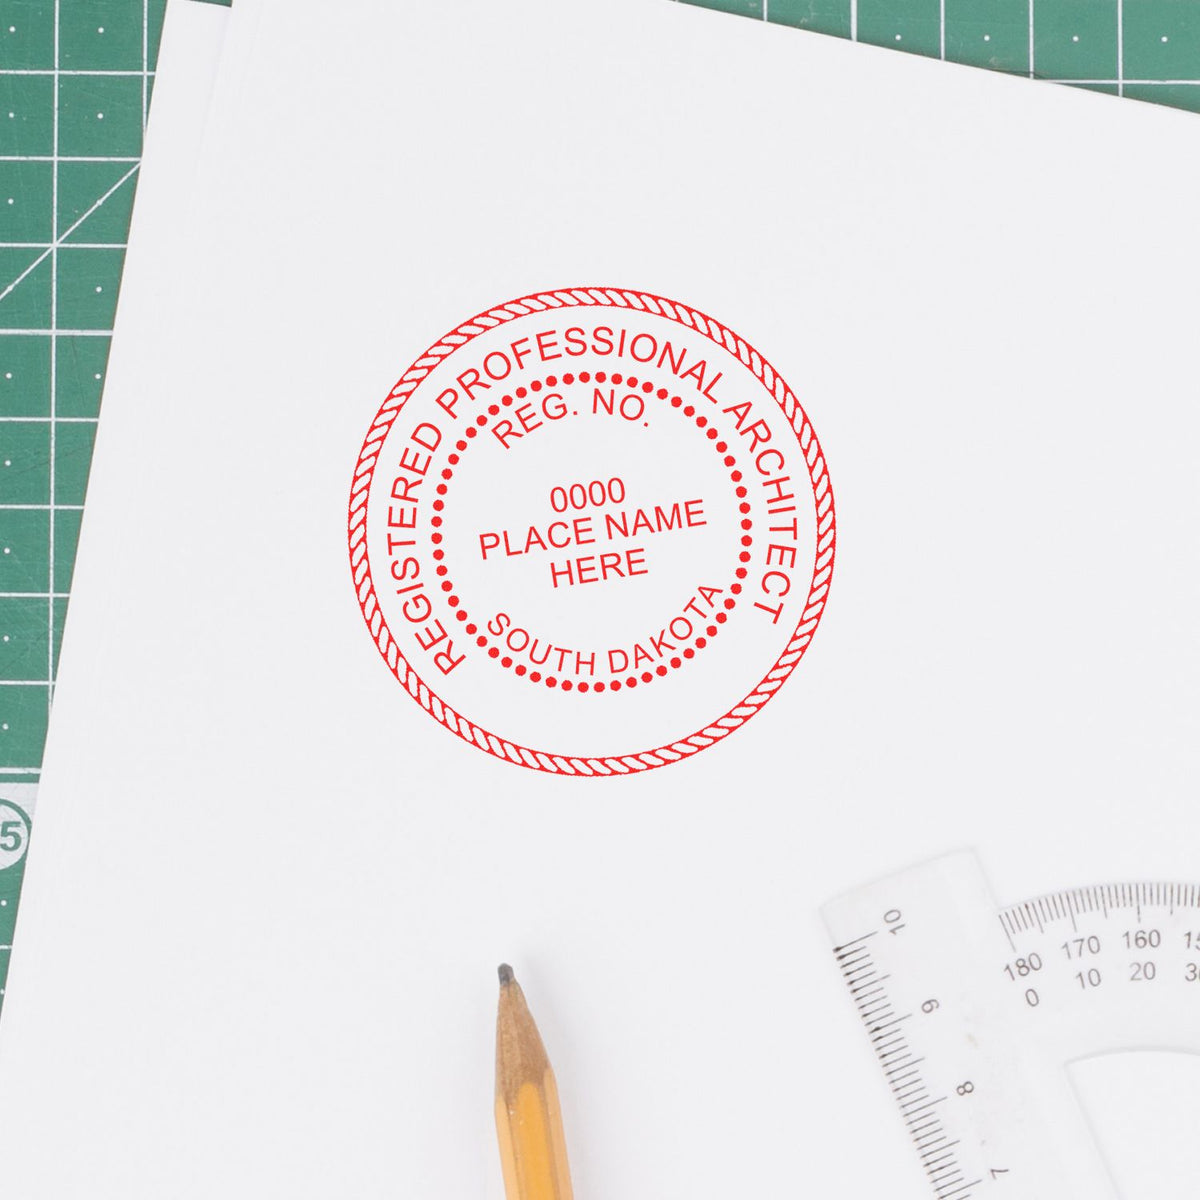 The Slim Pre-Inked South Dakota Architect Seal Stamp stamp impression comes to life with a crisp, detailed photo on paper - showcasing true professional quality.